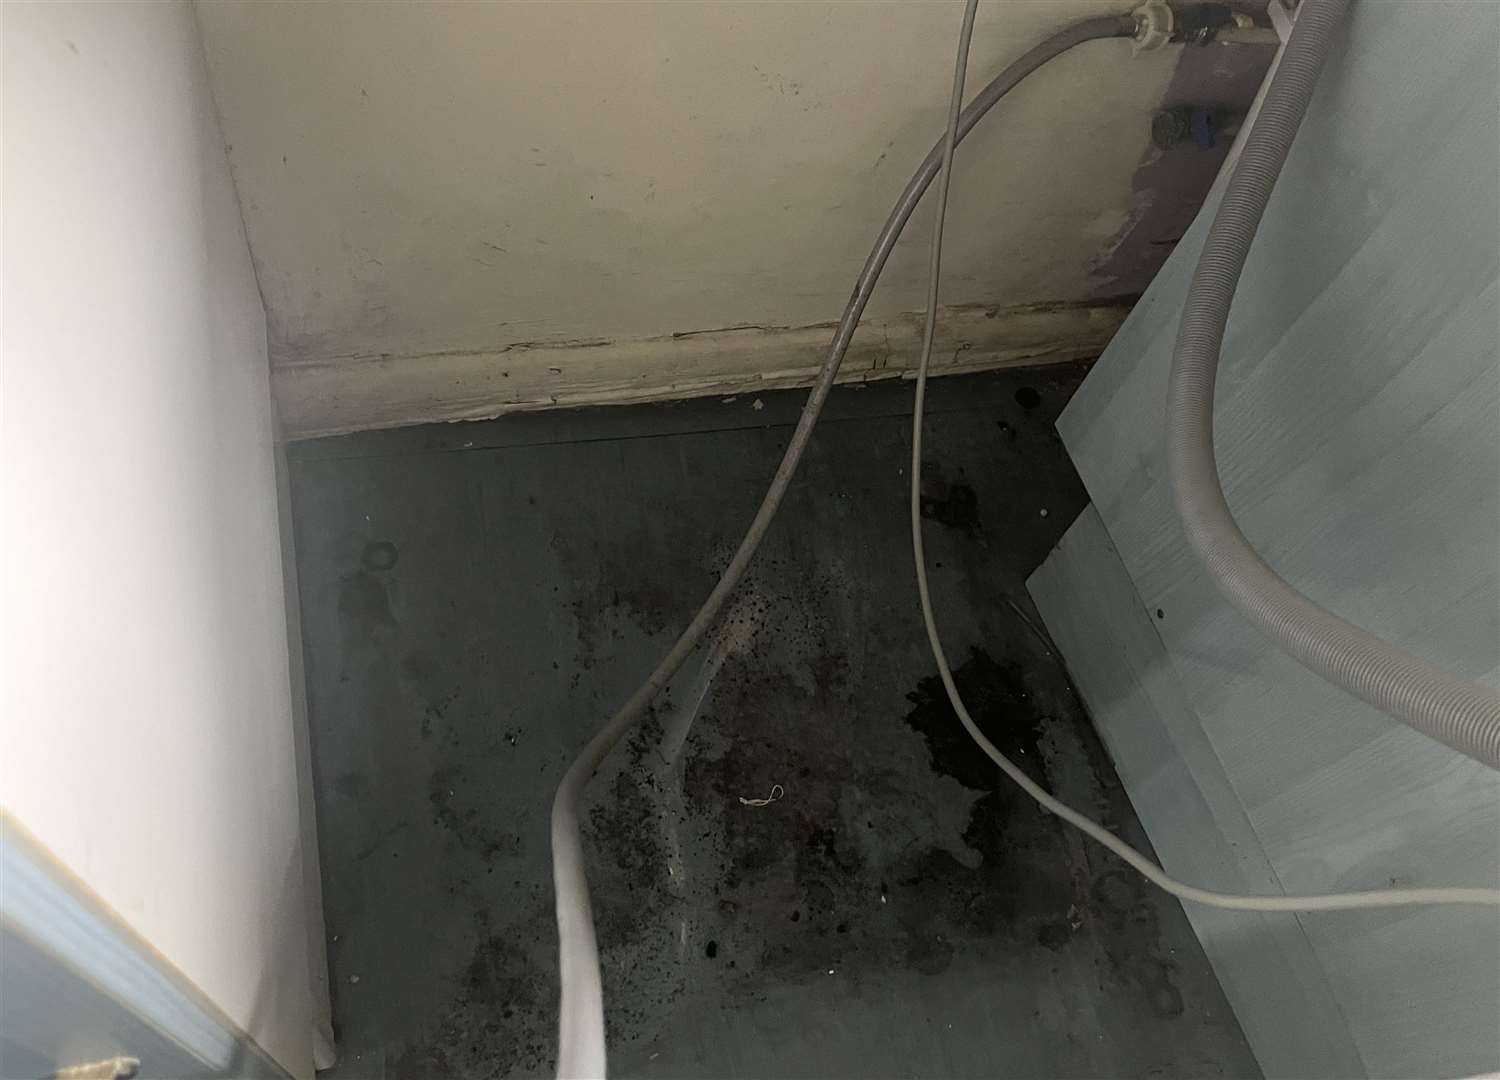 Site visits by Clarion Housing to Barbara Hasiuk’s flat identified a leaky washing machine as one of the causes of damp in the kitchen